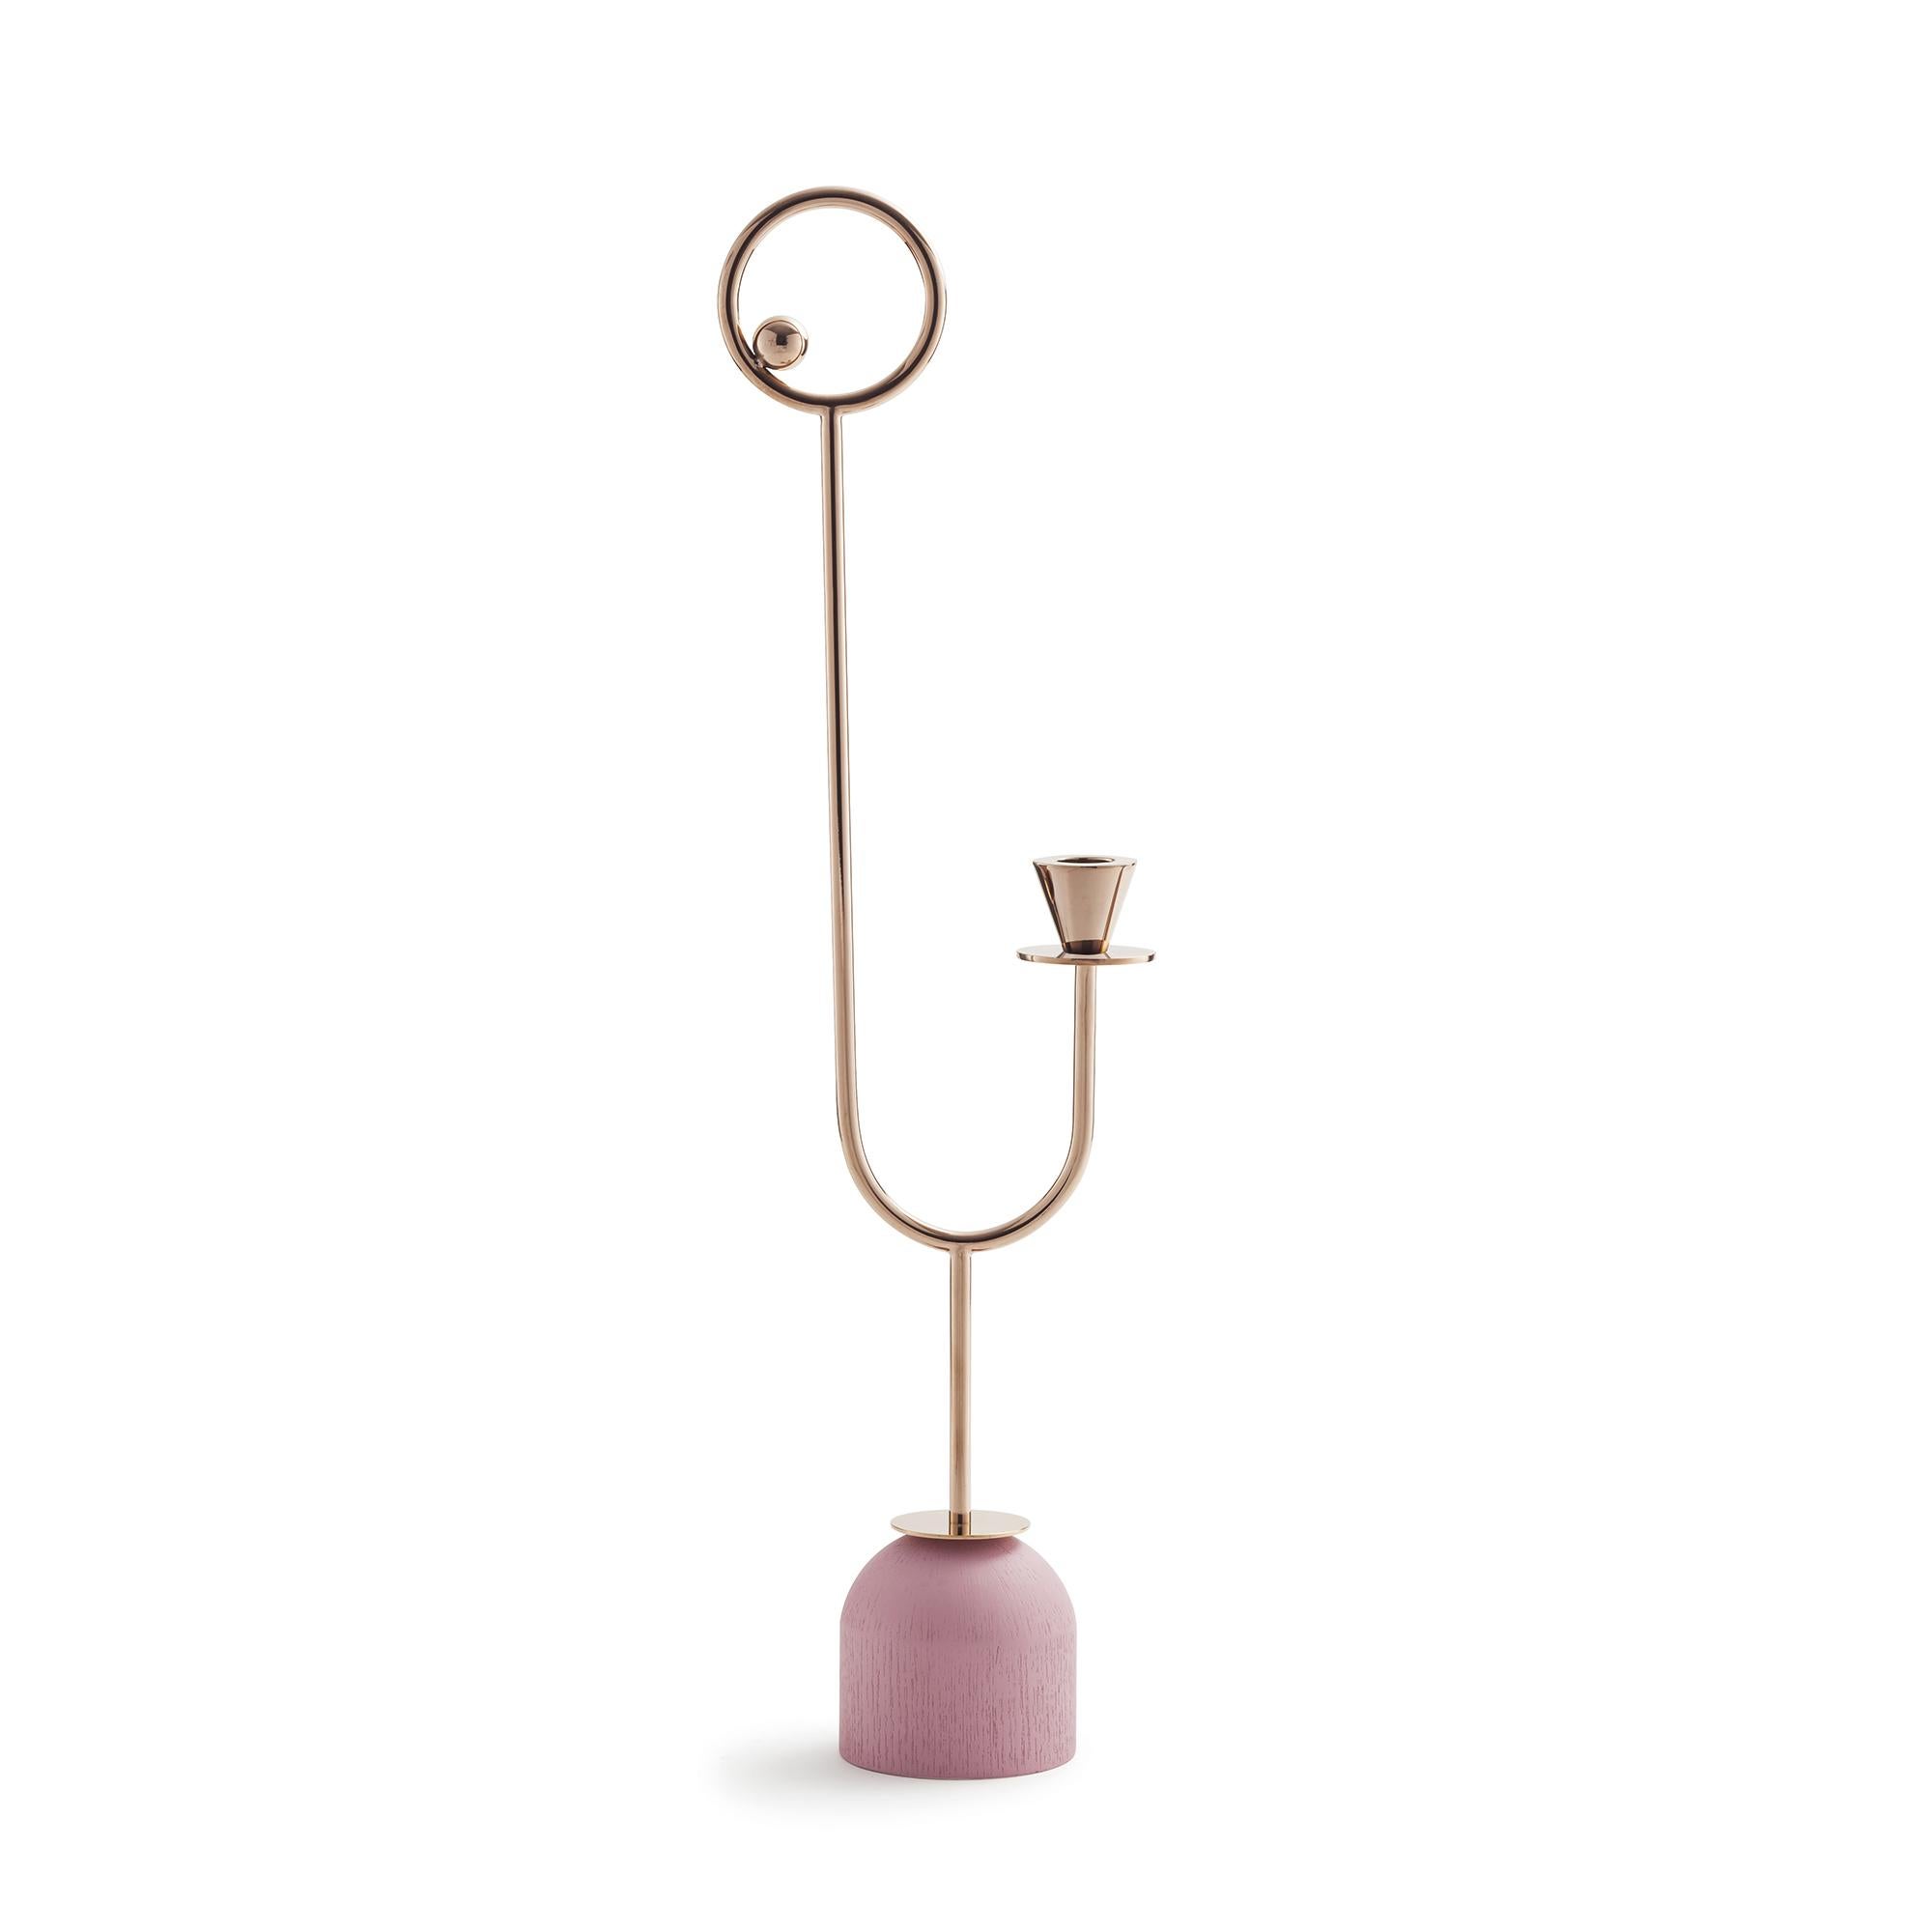 Paris Memphis N°3 candleholder by Thomas Dariel
Dimensions: D 8.5 x W 14.1 x H 50 cm 
Materials: Plated metal coated with glossy pink copper finish base in ash veneer painted in matte dusty pink, yellow or blue. 
Also available in colors: Blue,